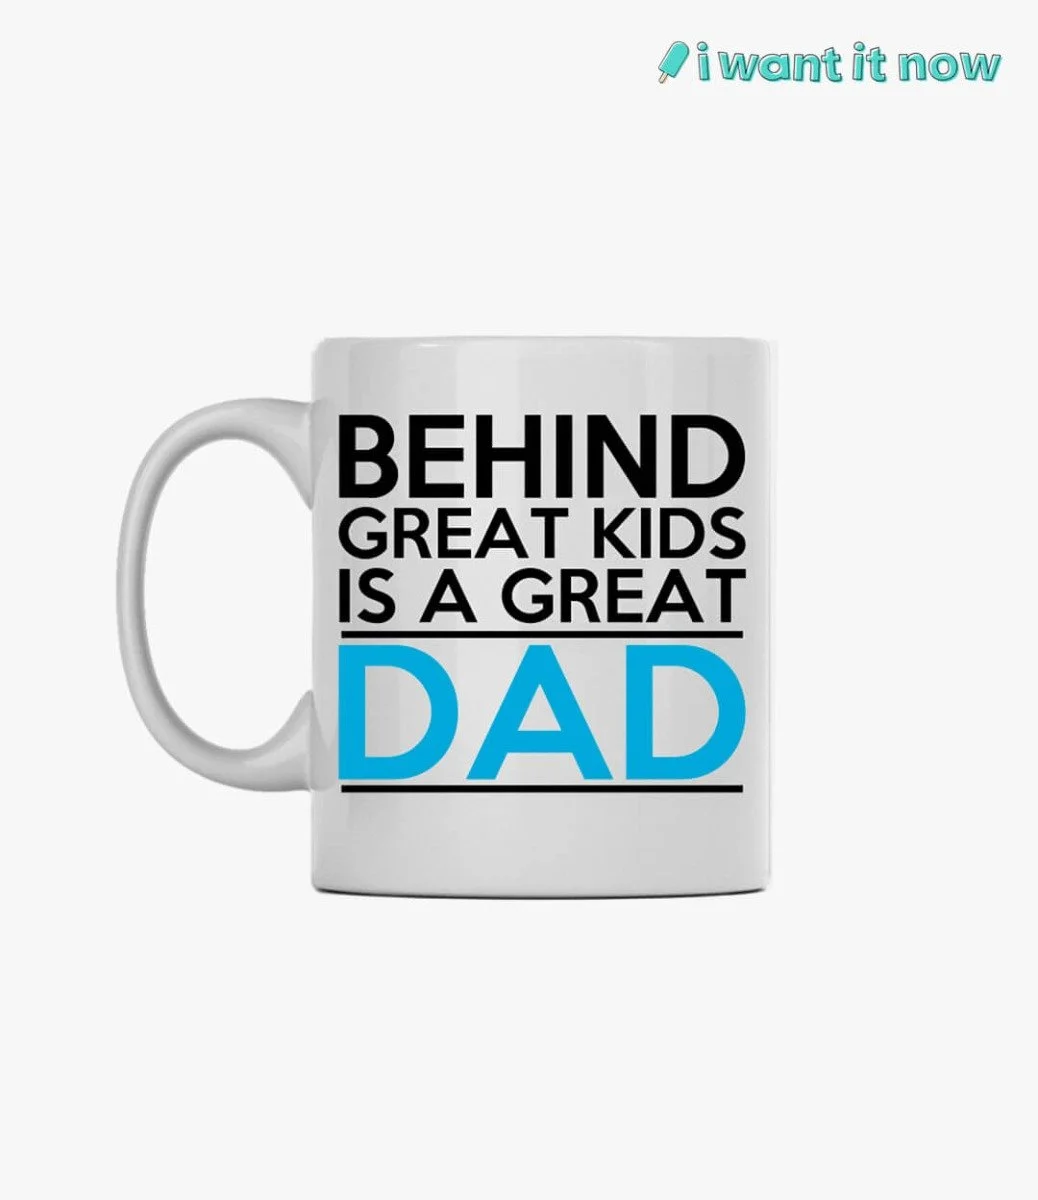 Dad Nutrition Facts Mug By I Want It Now 6